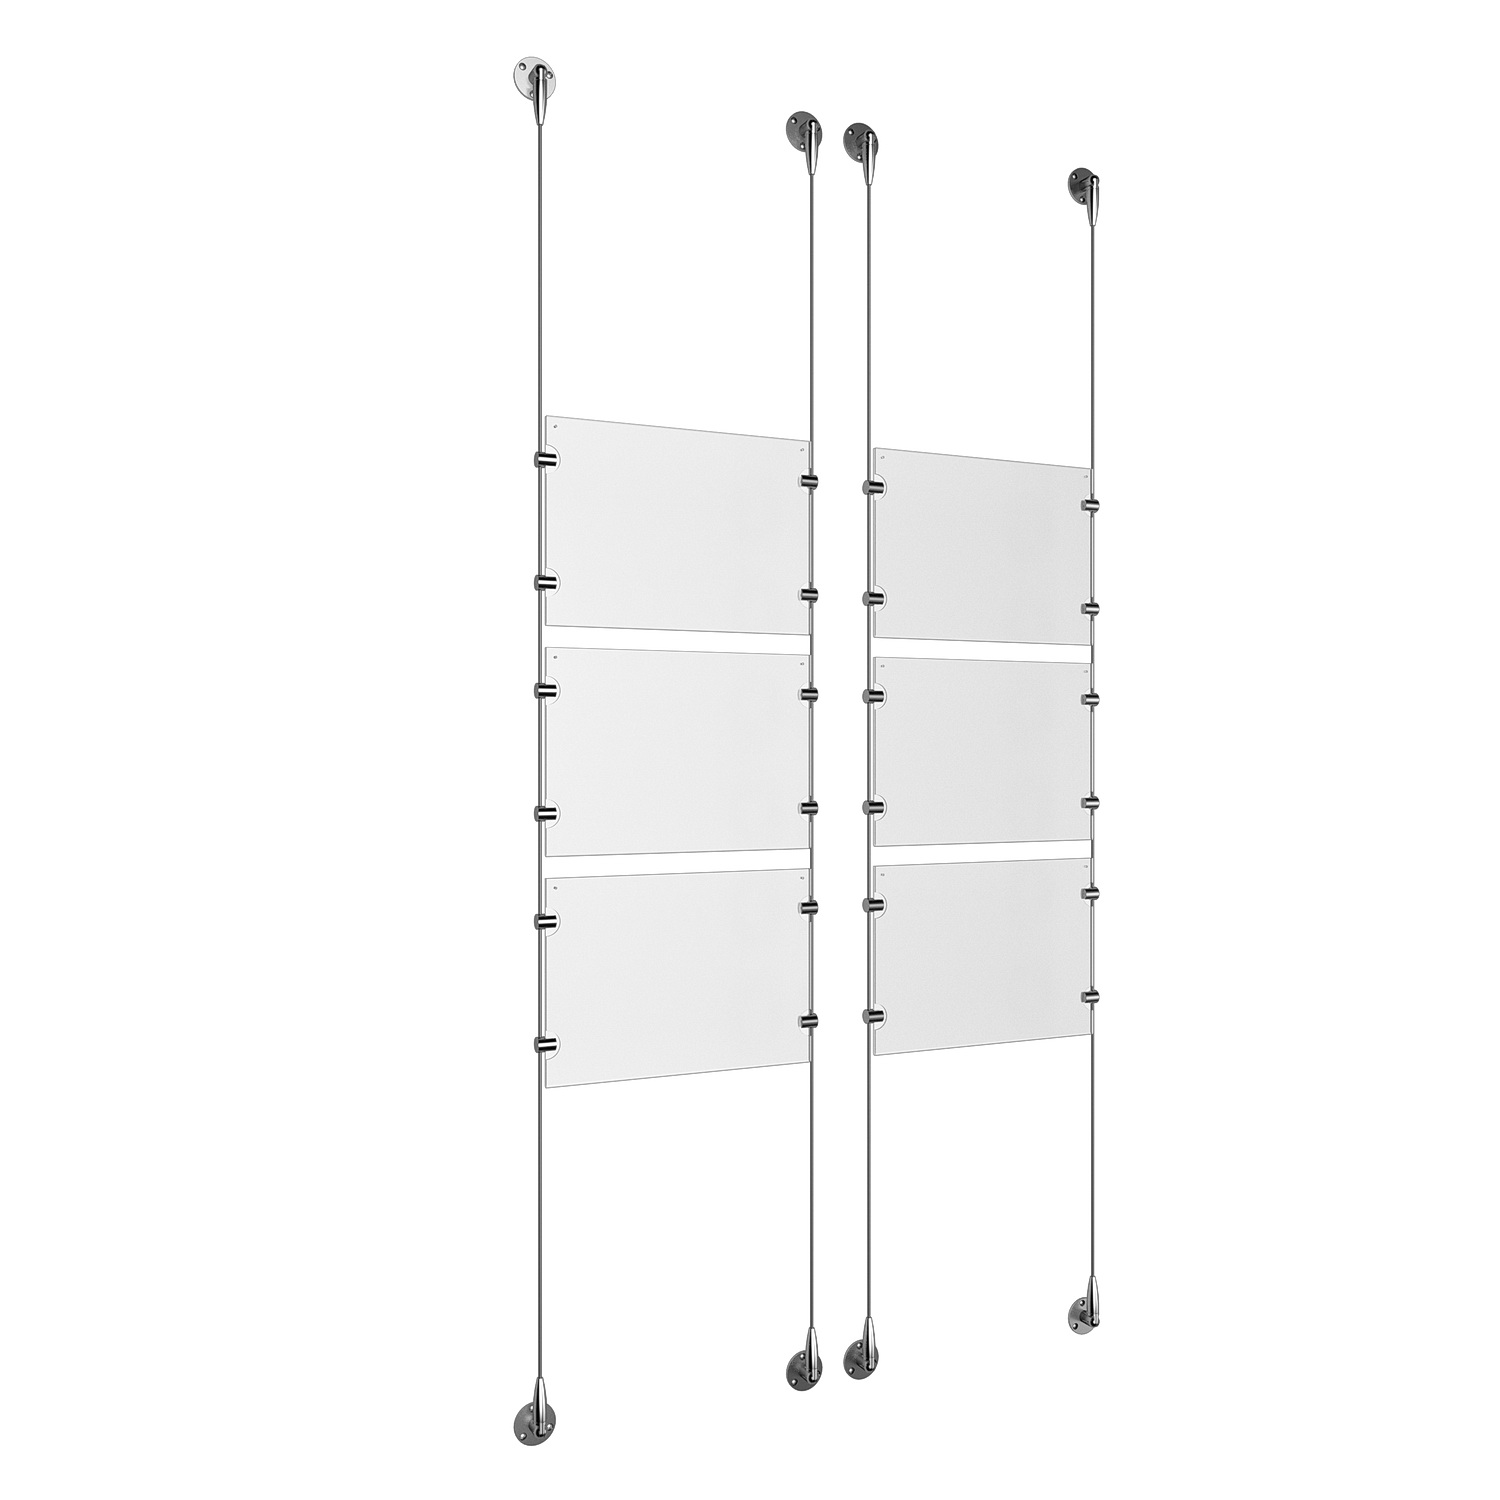 (6) 11'' Width x 8-1/2'' Height Clear Acrylic Frame & (4) Stainless Steel Satin Brushed Adjustable Angle Signature 1/8'' Cable Systems with (24) Single-Sided Panel Grippers